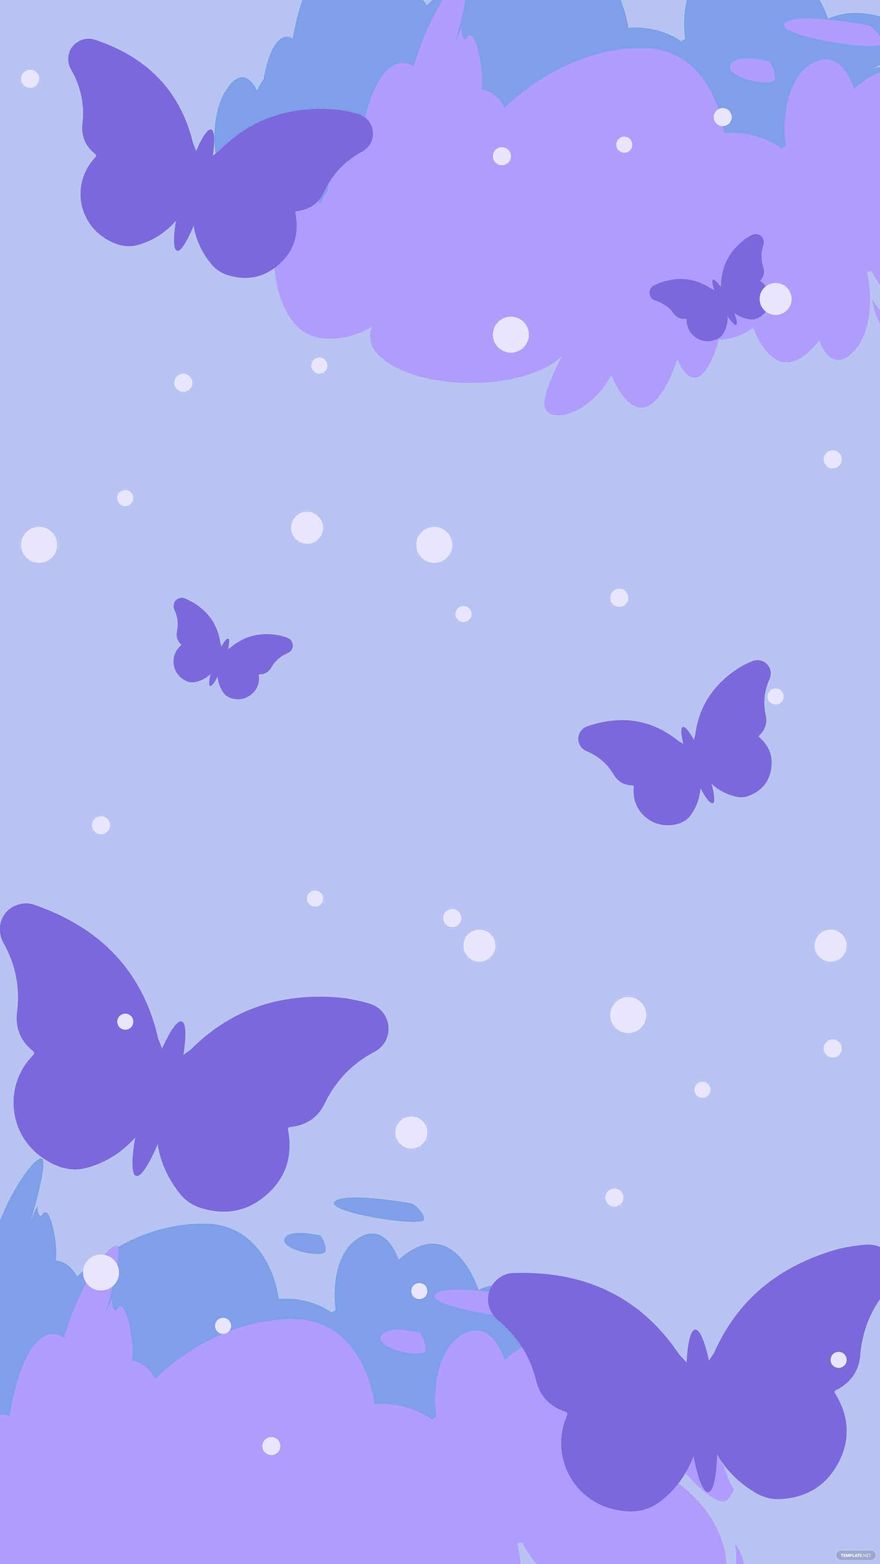 Iphone Butterfly Background - EPS, Illustrator, JPG, PNG, SVG 